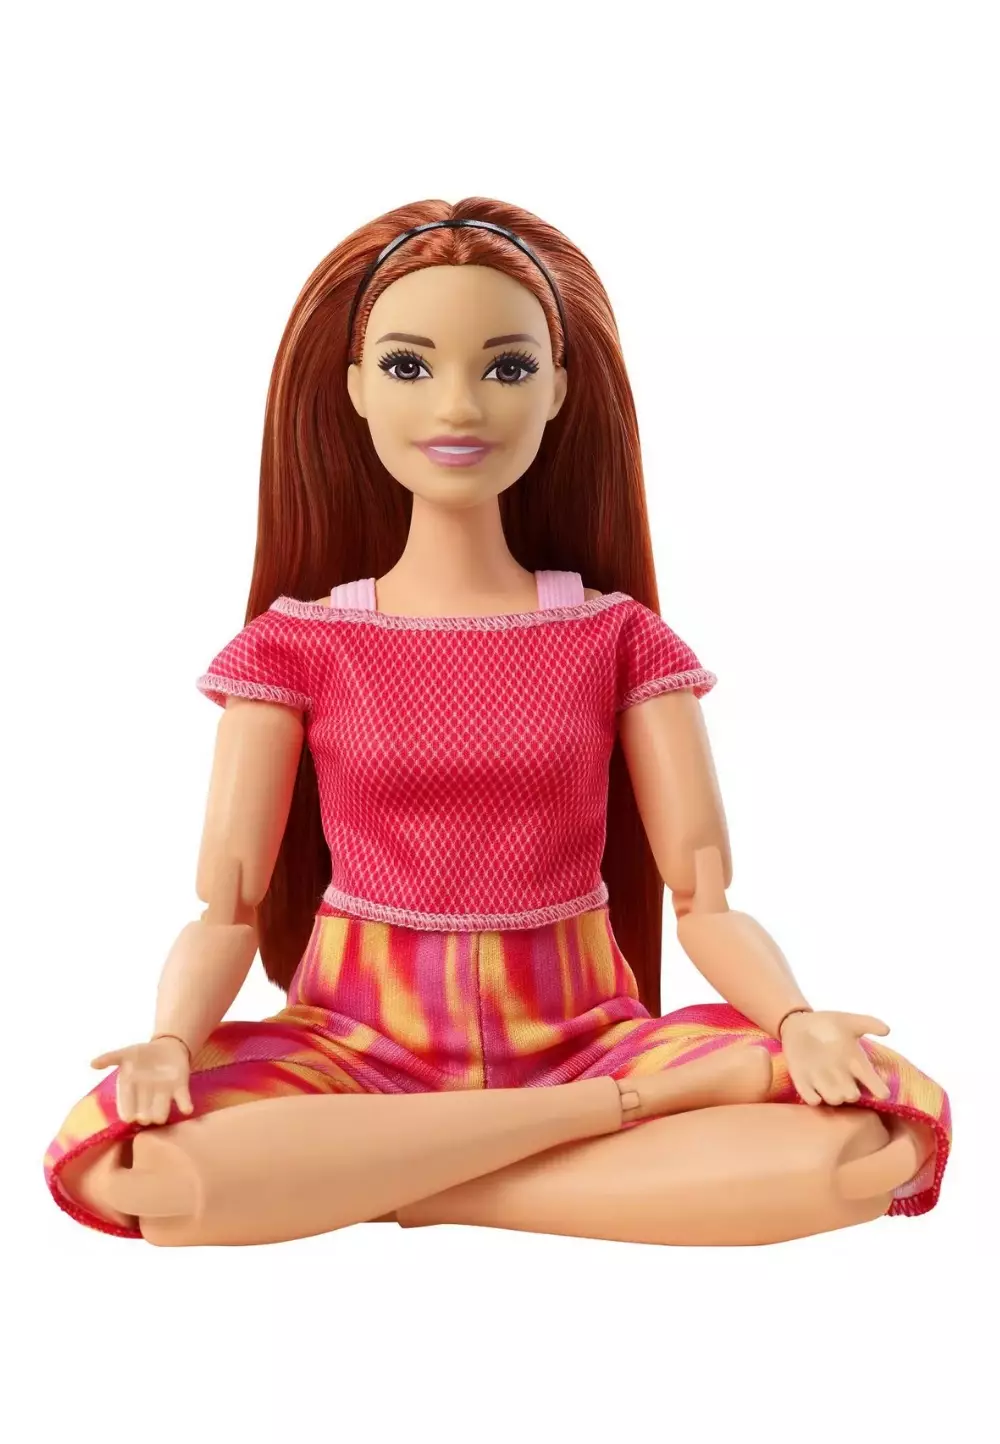 New Barbie Made to Move 2024 yoga dolls 